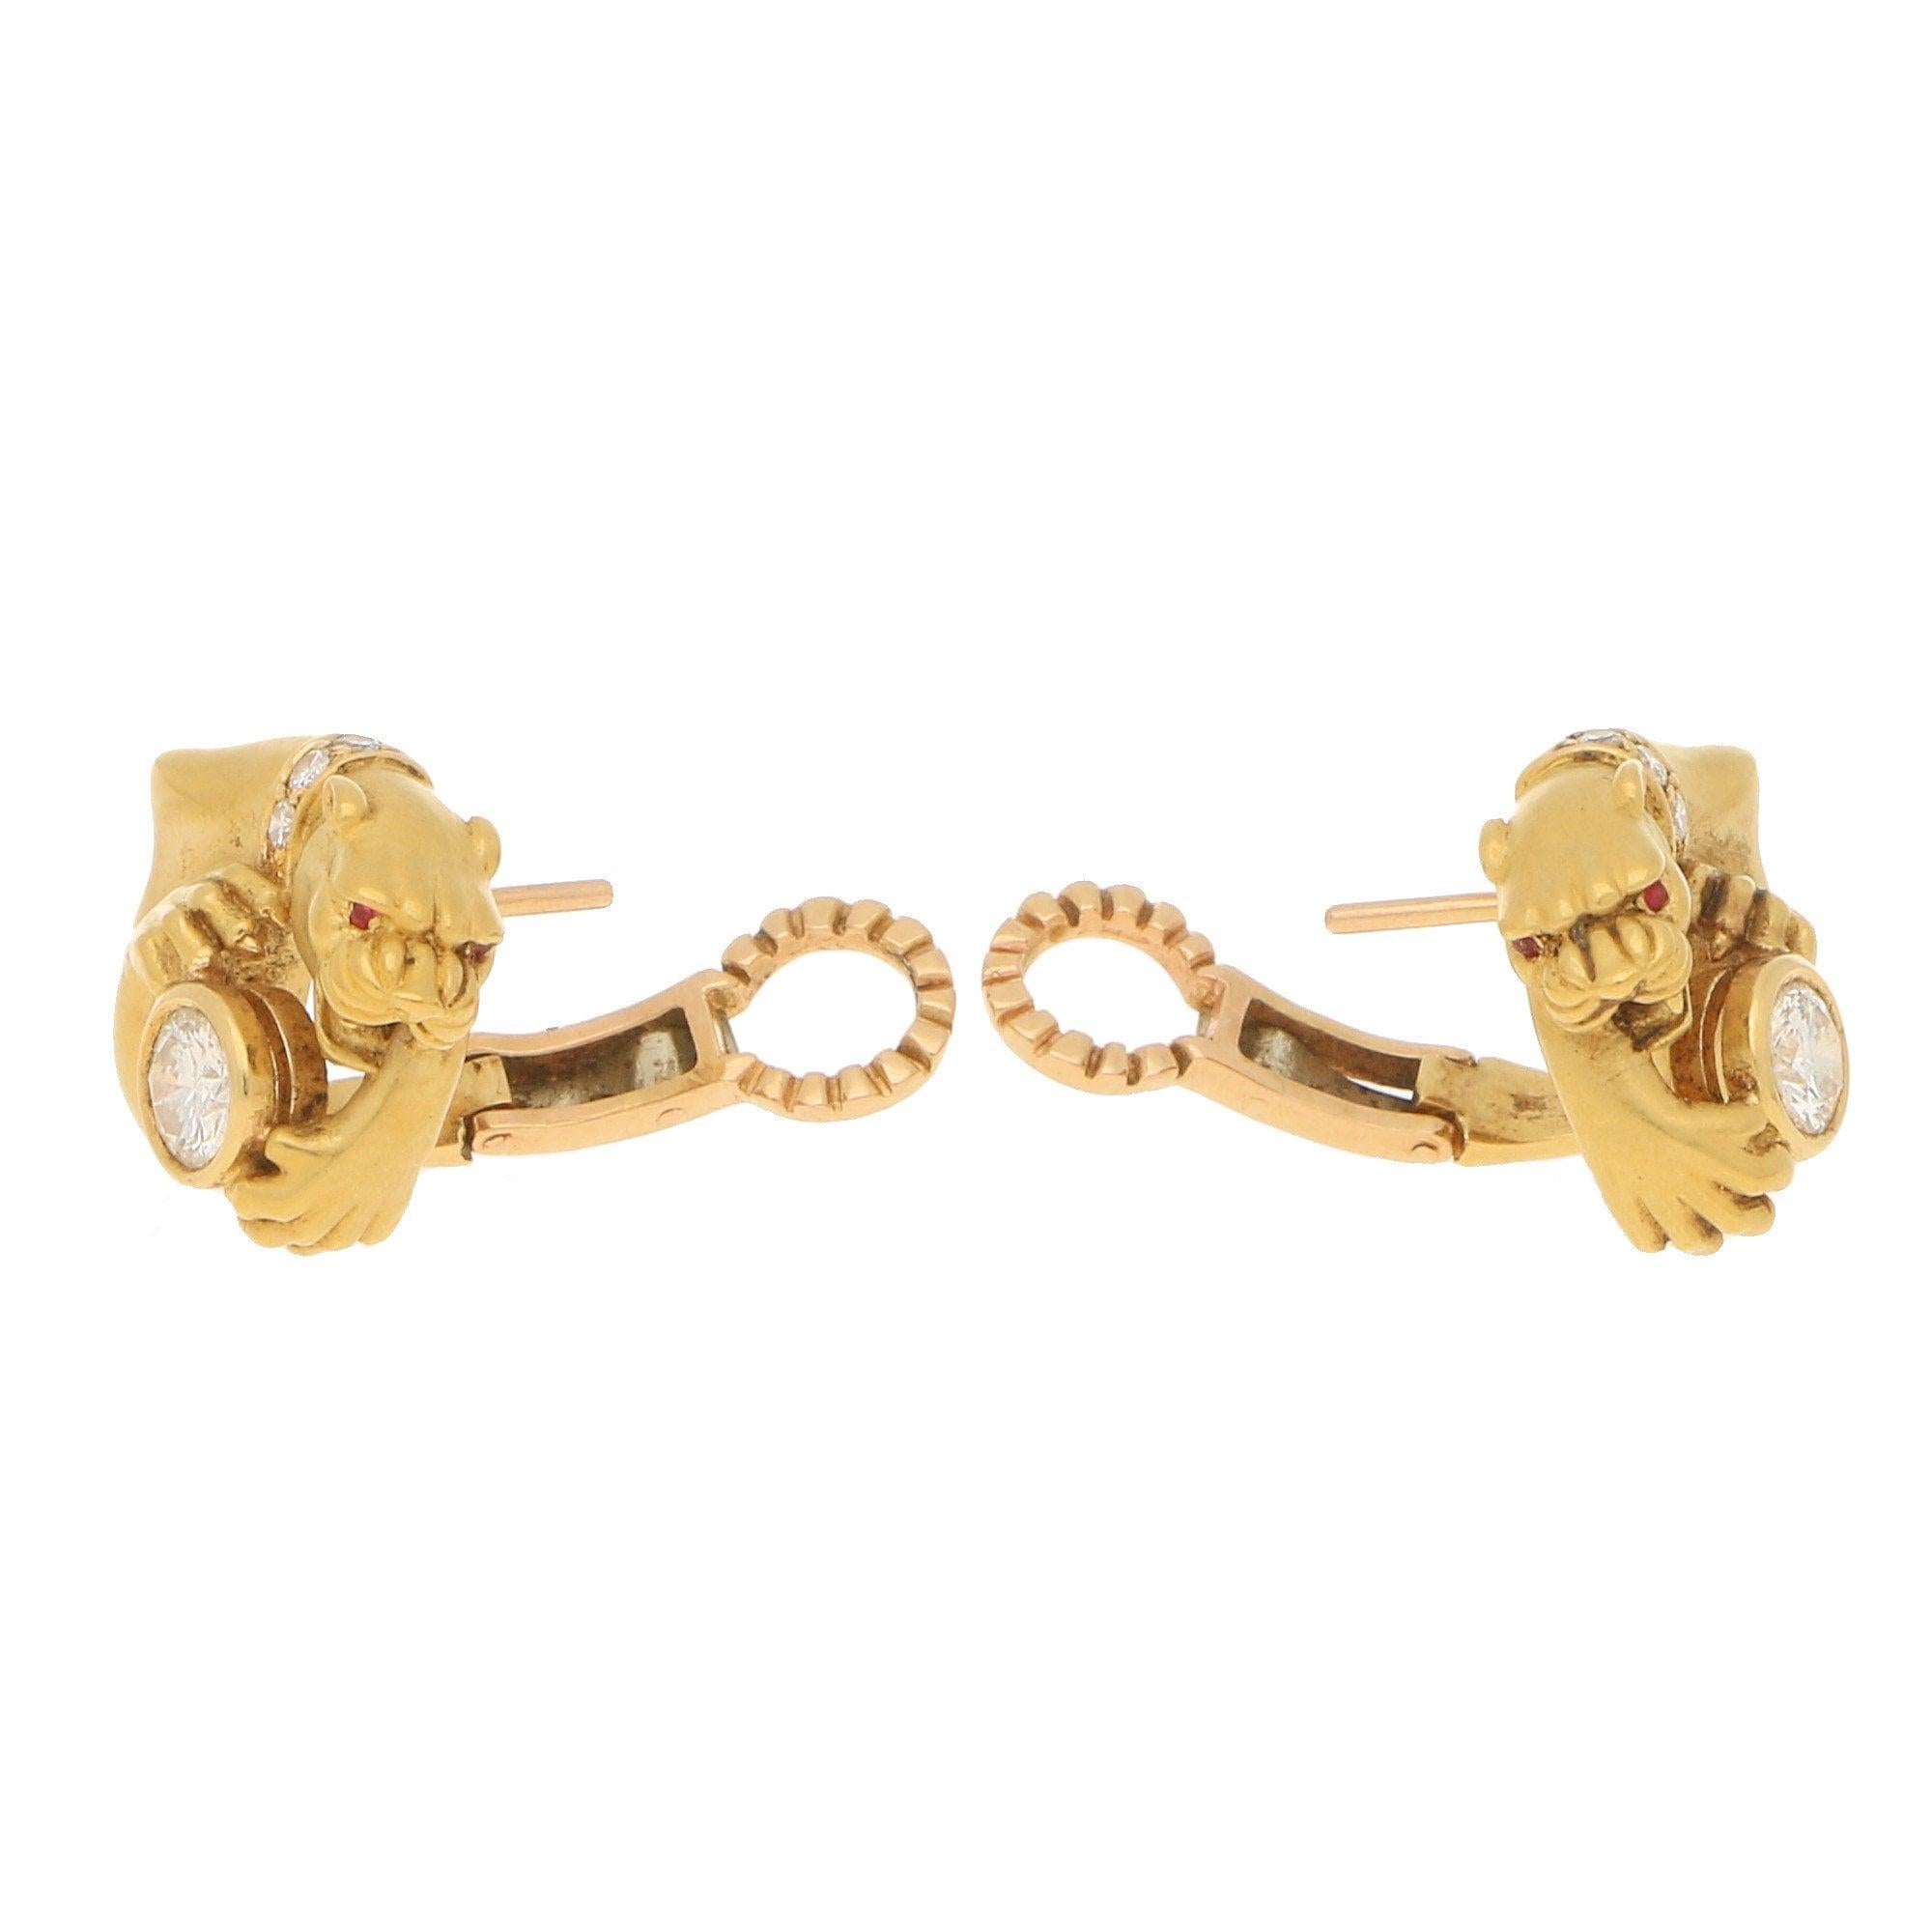 A pair of Carrera y Carrera diamond panther earrings in 18-karat yellow gold, circa 1980. Each earring is depicted as a panther pouching on a collet-set round brilliant-cut diamond, further accented with a round brilliant-cut diamond collar and